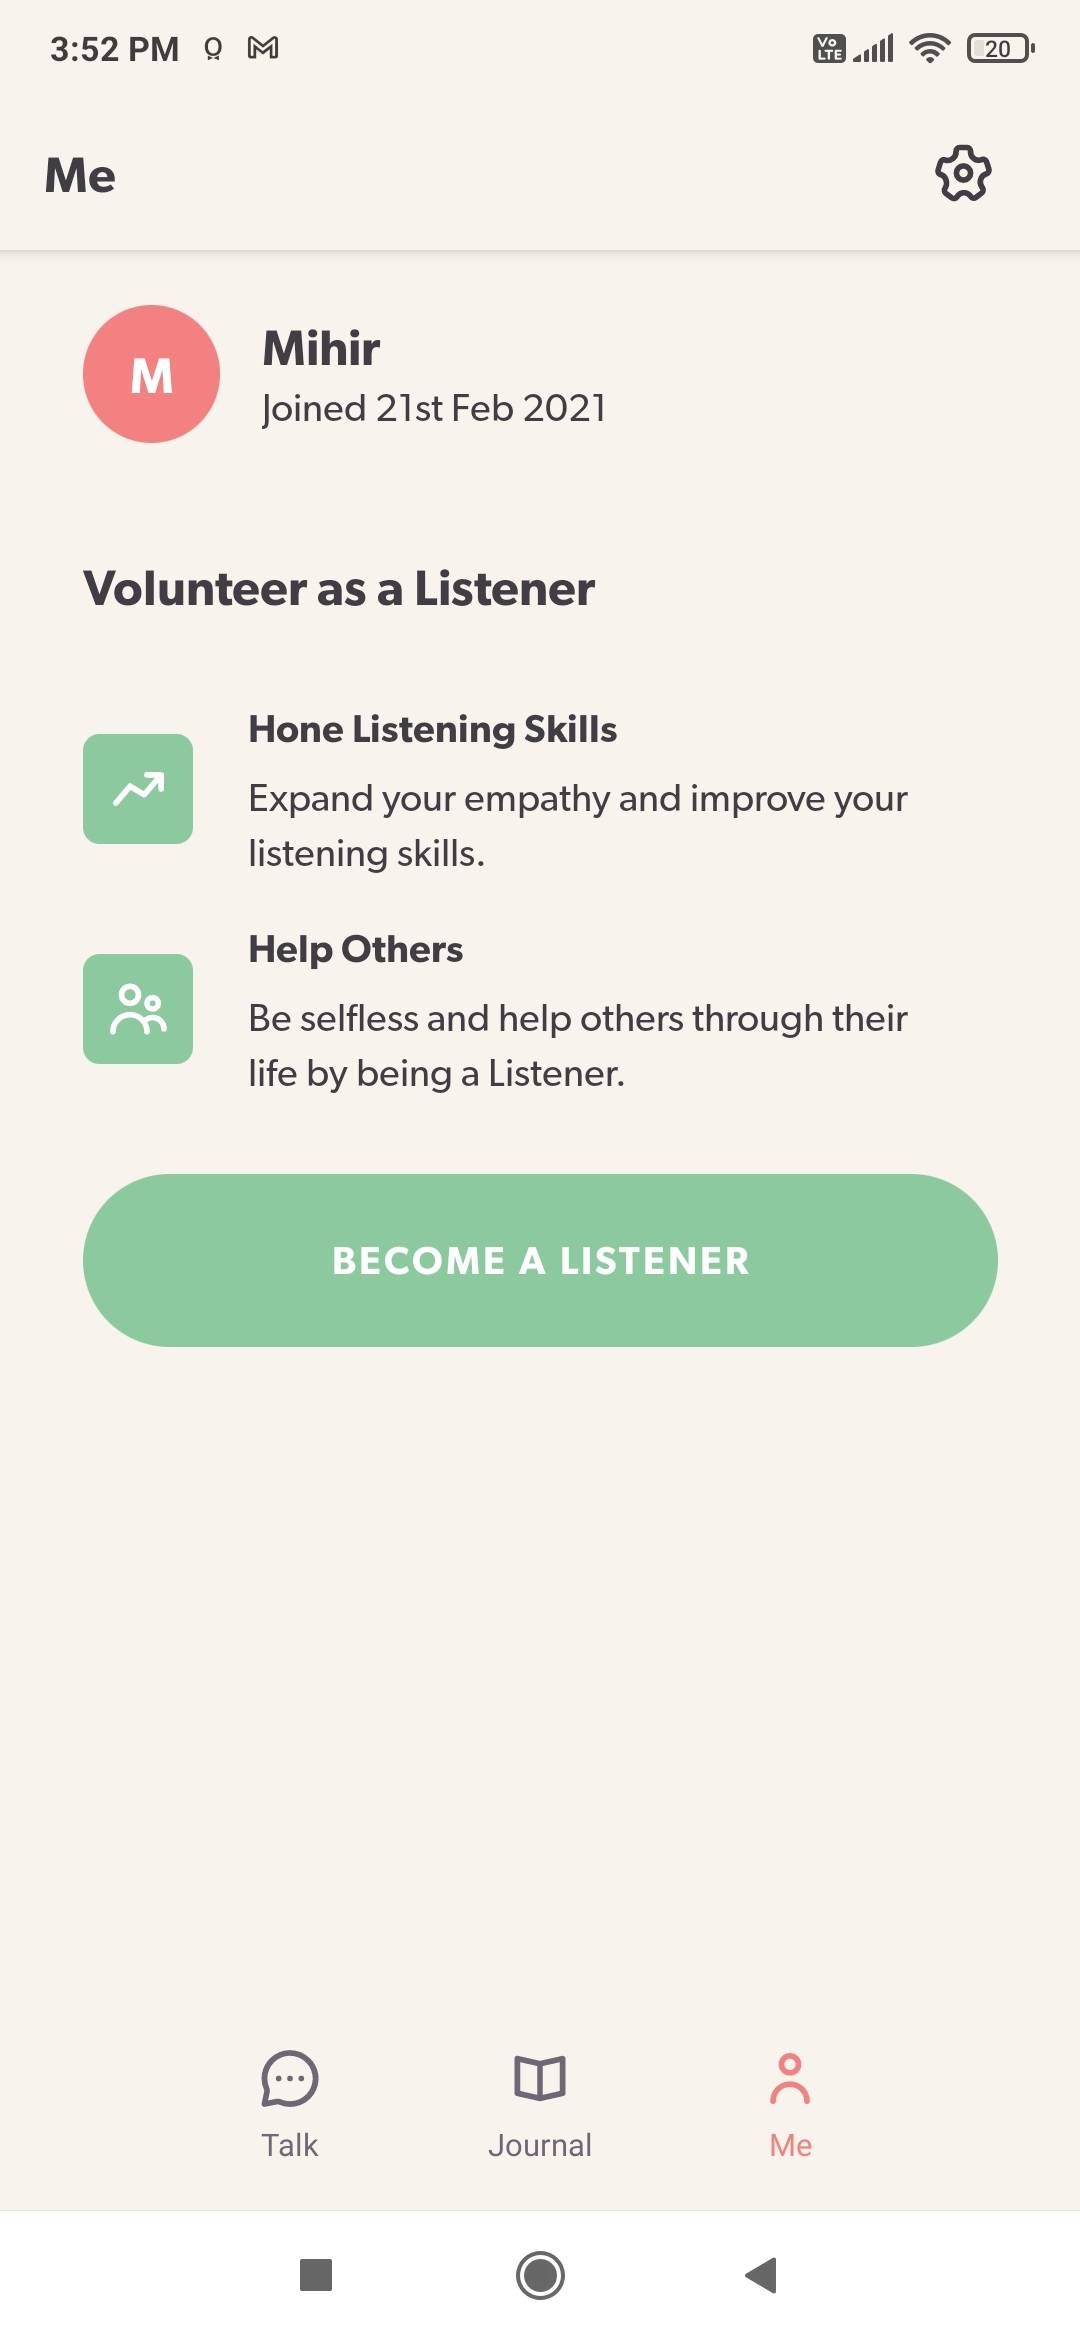 You can volunteer to become a listener at HearMe, after taking a short course on the essentials of being a good listener